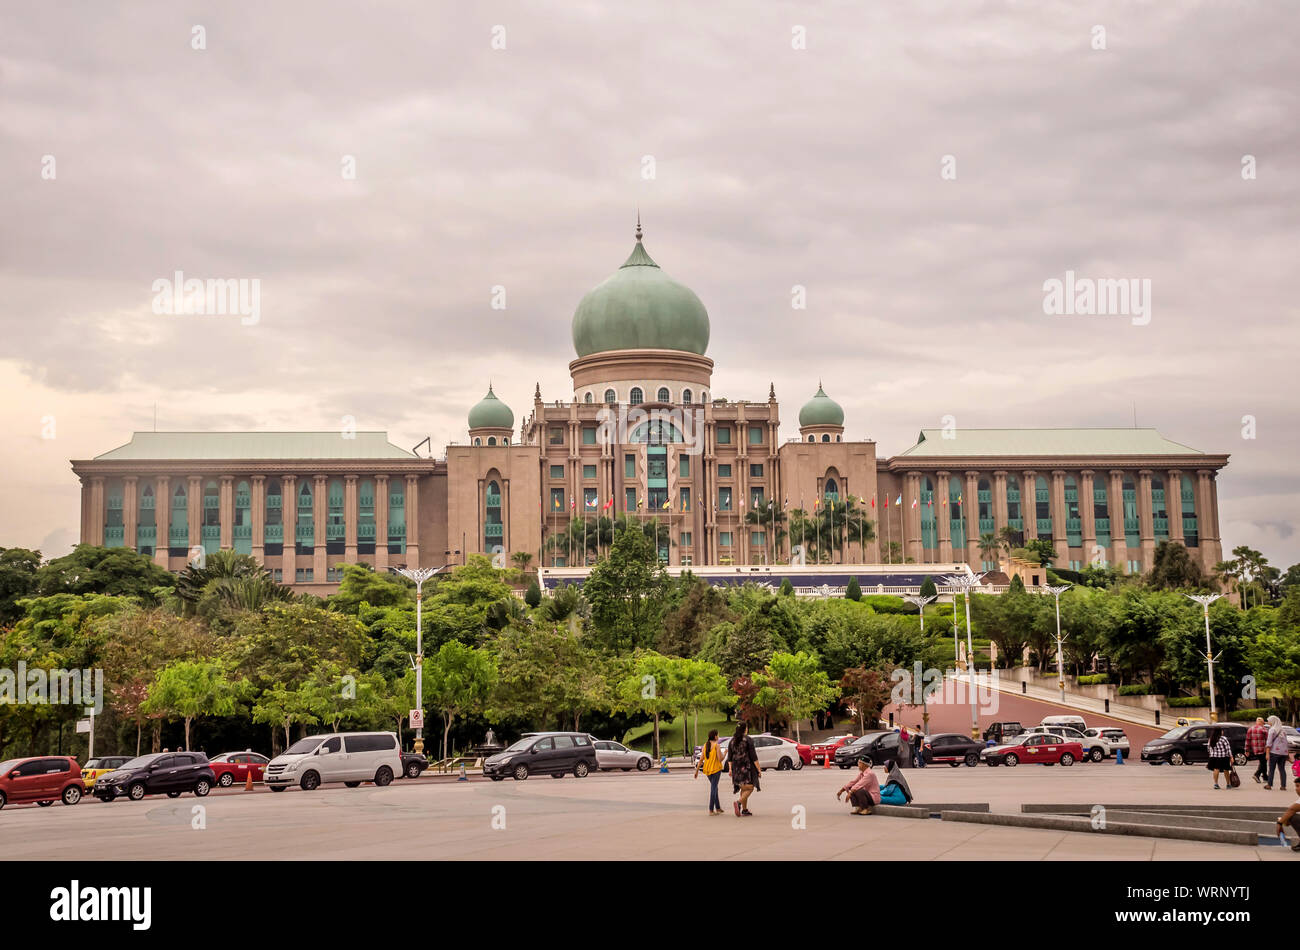 Perdana Putra Is The Office Of The Prime Minister Of Malaysia Also Federal Government Legislative Building Located On The Main Hill In Putrajaya Stock Photo Alamy